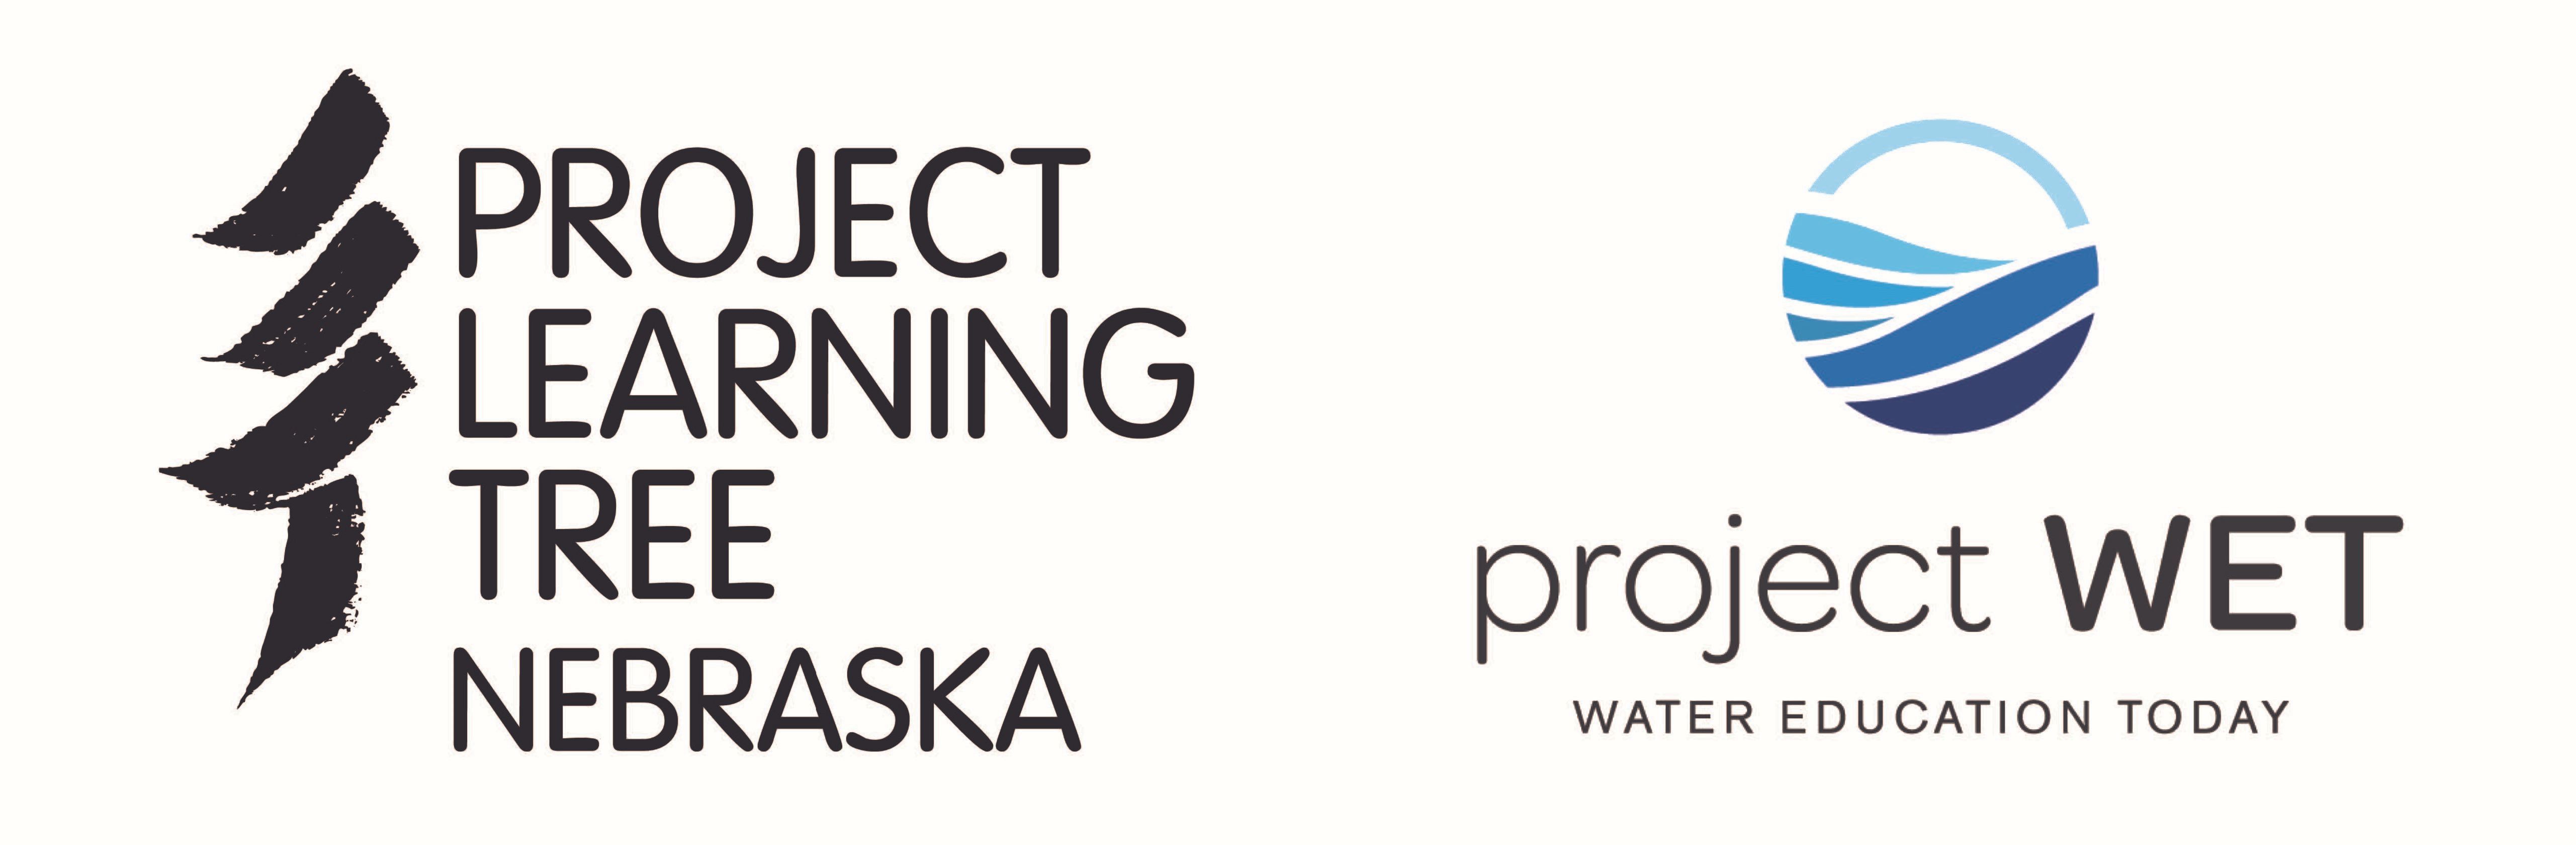 Project Learning Tree & Project WET 